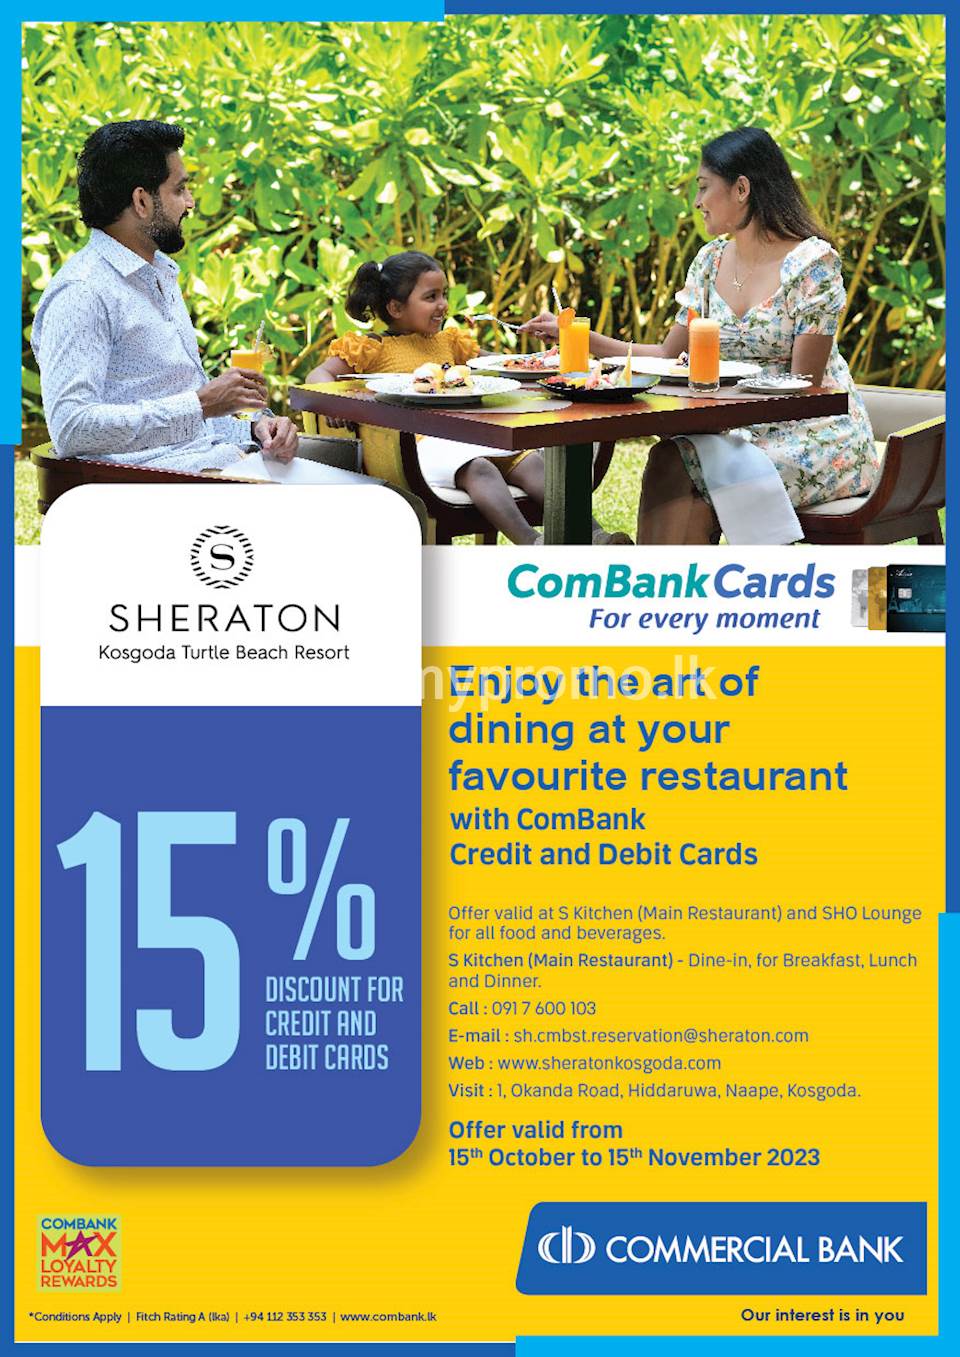 Enjoy the art of dining at Sheraton Kosgoda Turtle Beach Resort with ComBank Credit and Debit Cards